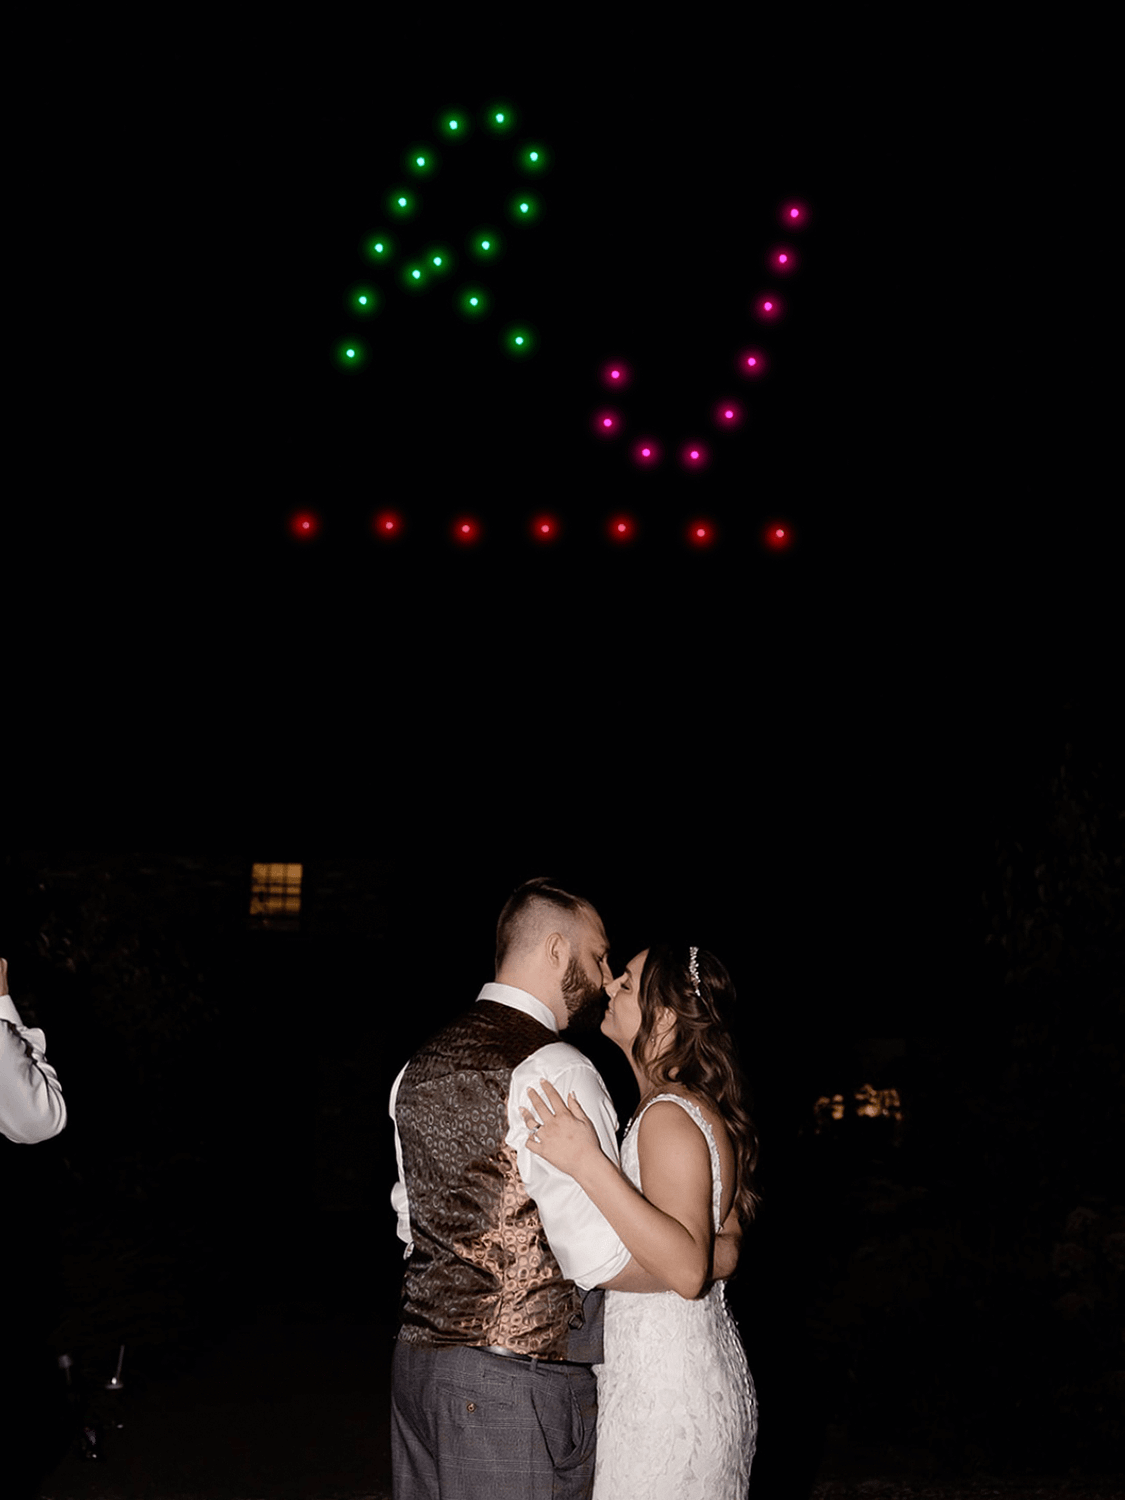 RJ initials in the sky with 30 drones in the wedding drone light show